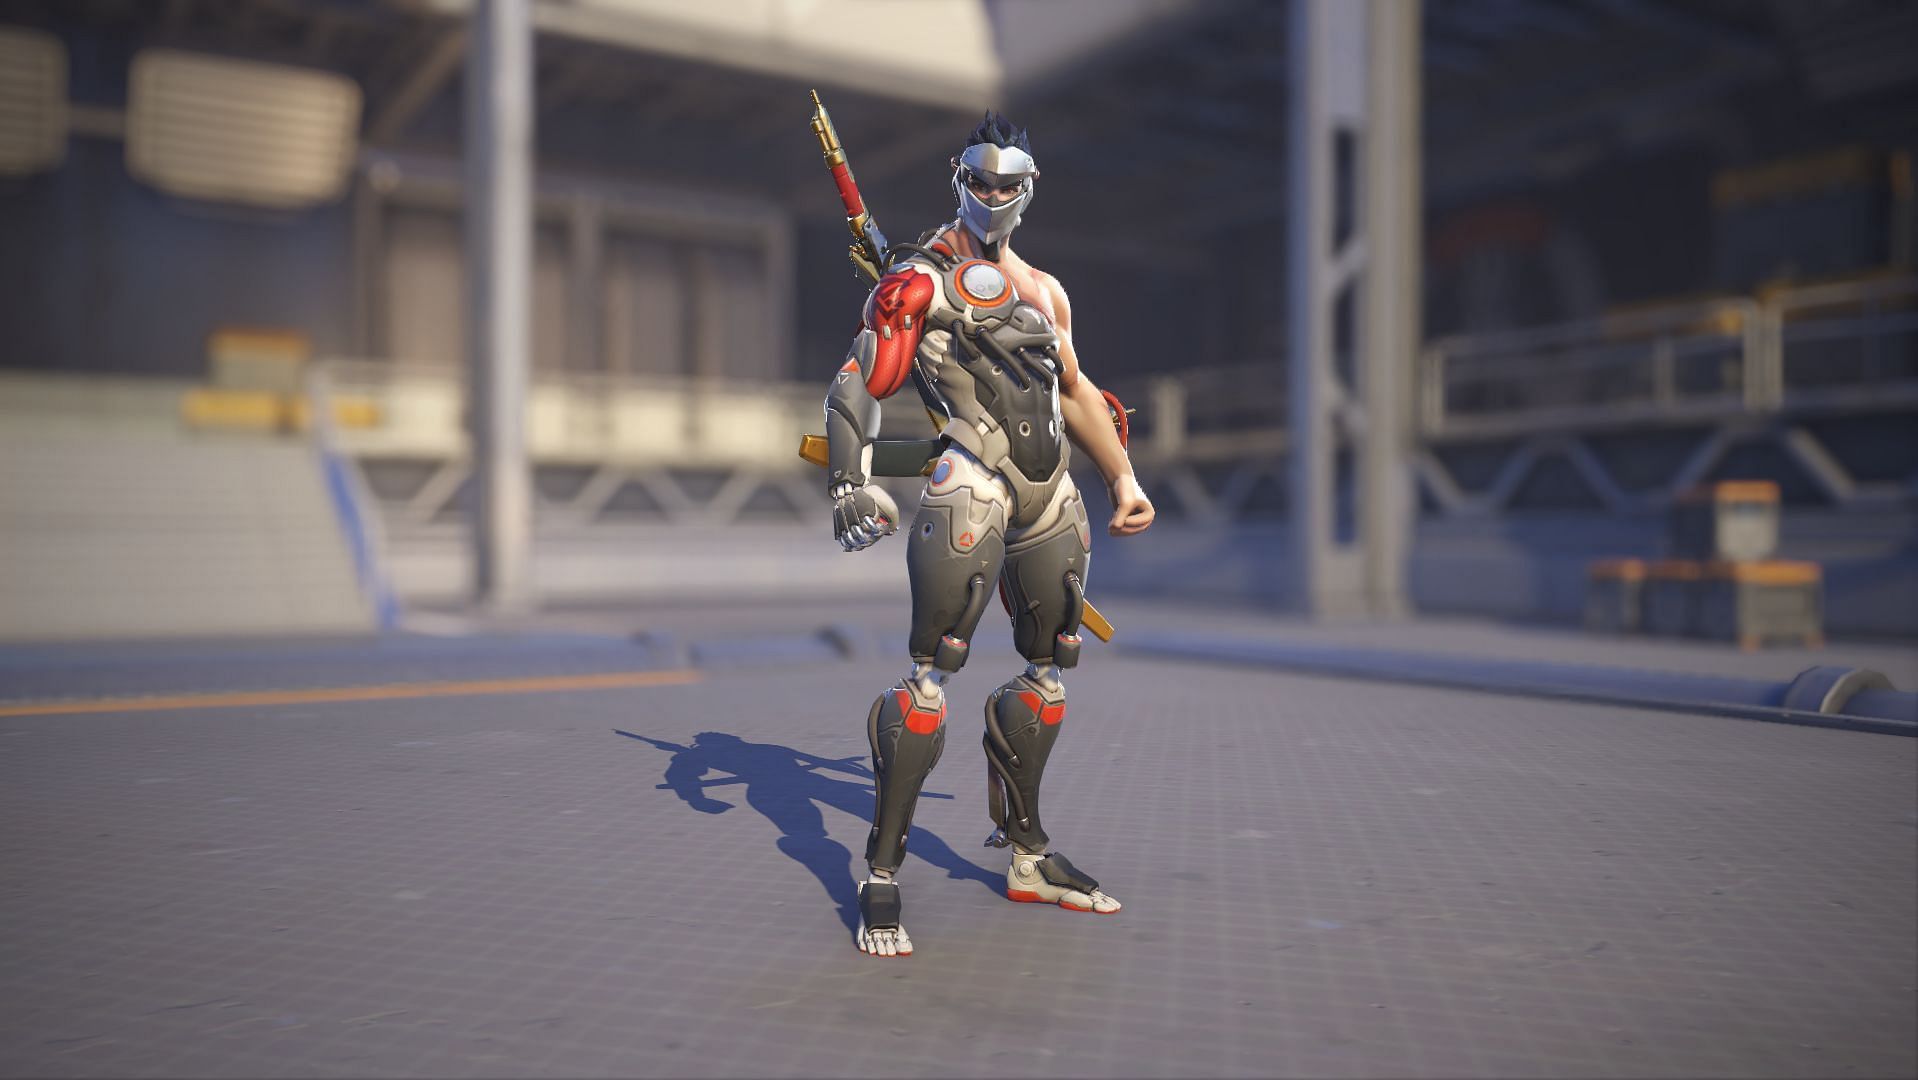 Blackwatch skin as seen in Overwatch 2 (Image via Blizzard Entertainment)